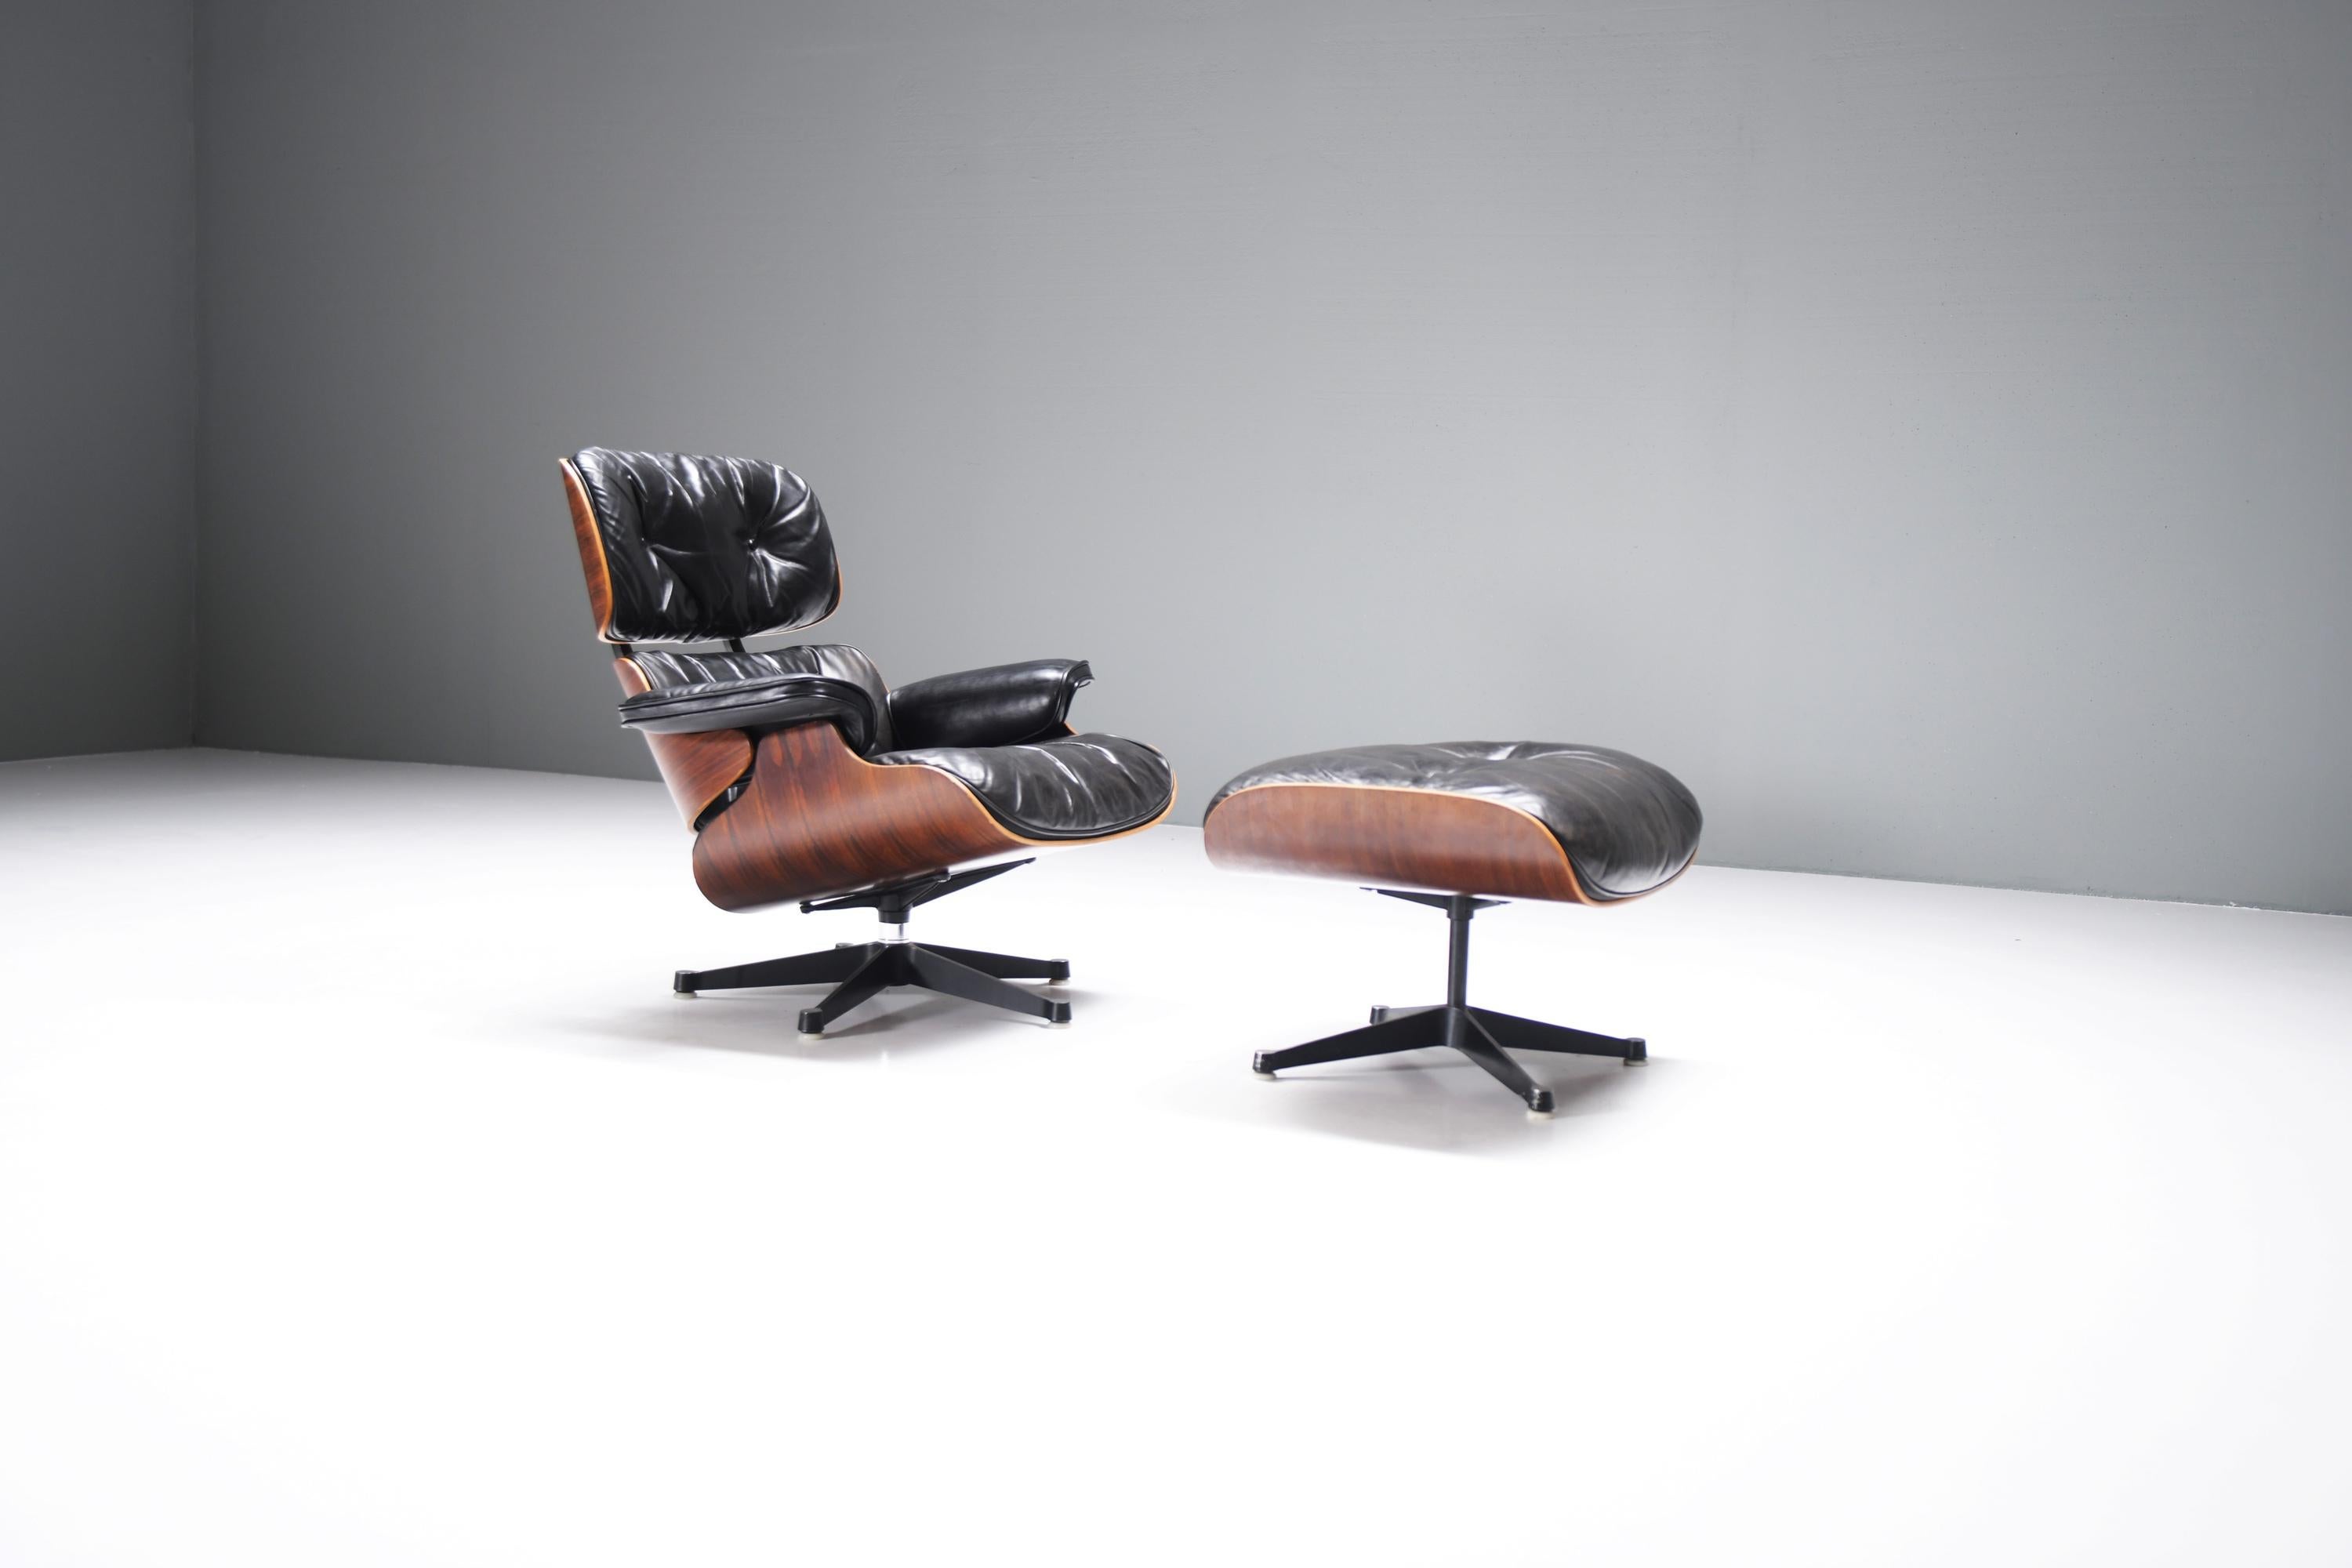 Mid-Century Modern Eames lounge by Ray & Charles Eames by Mobilier International for Herman Miller